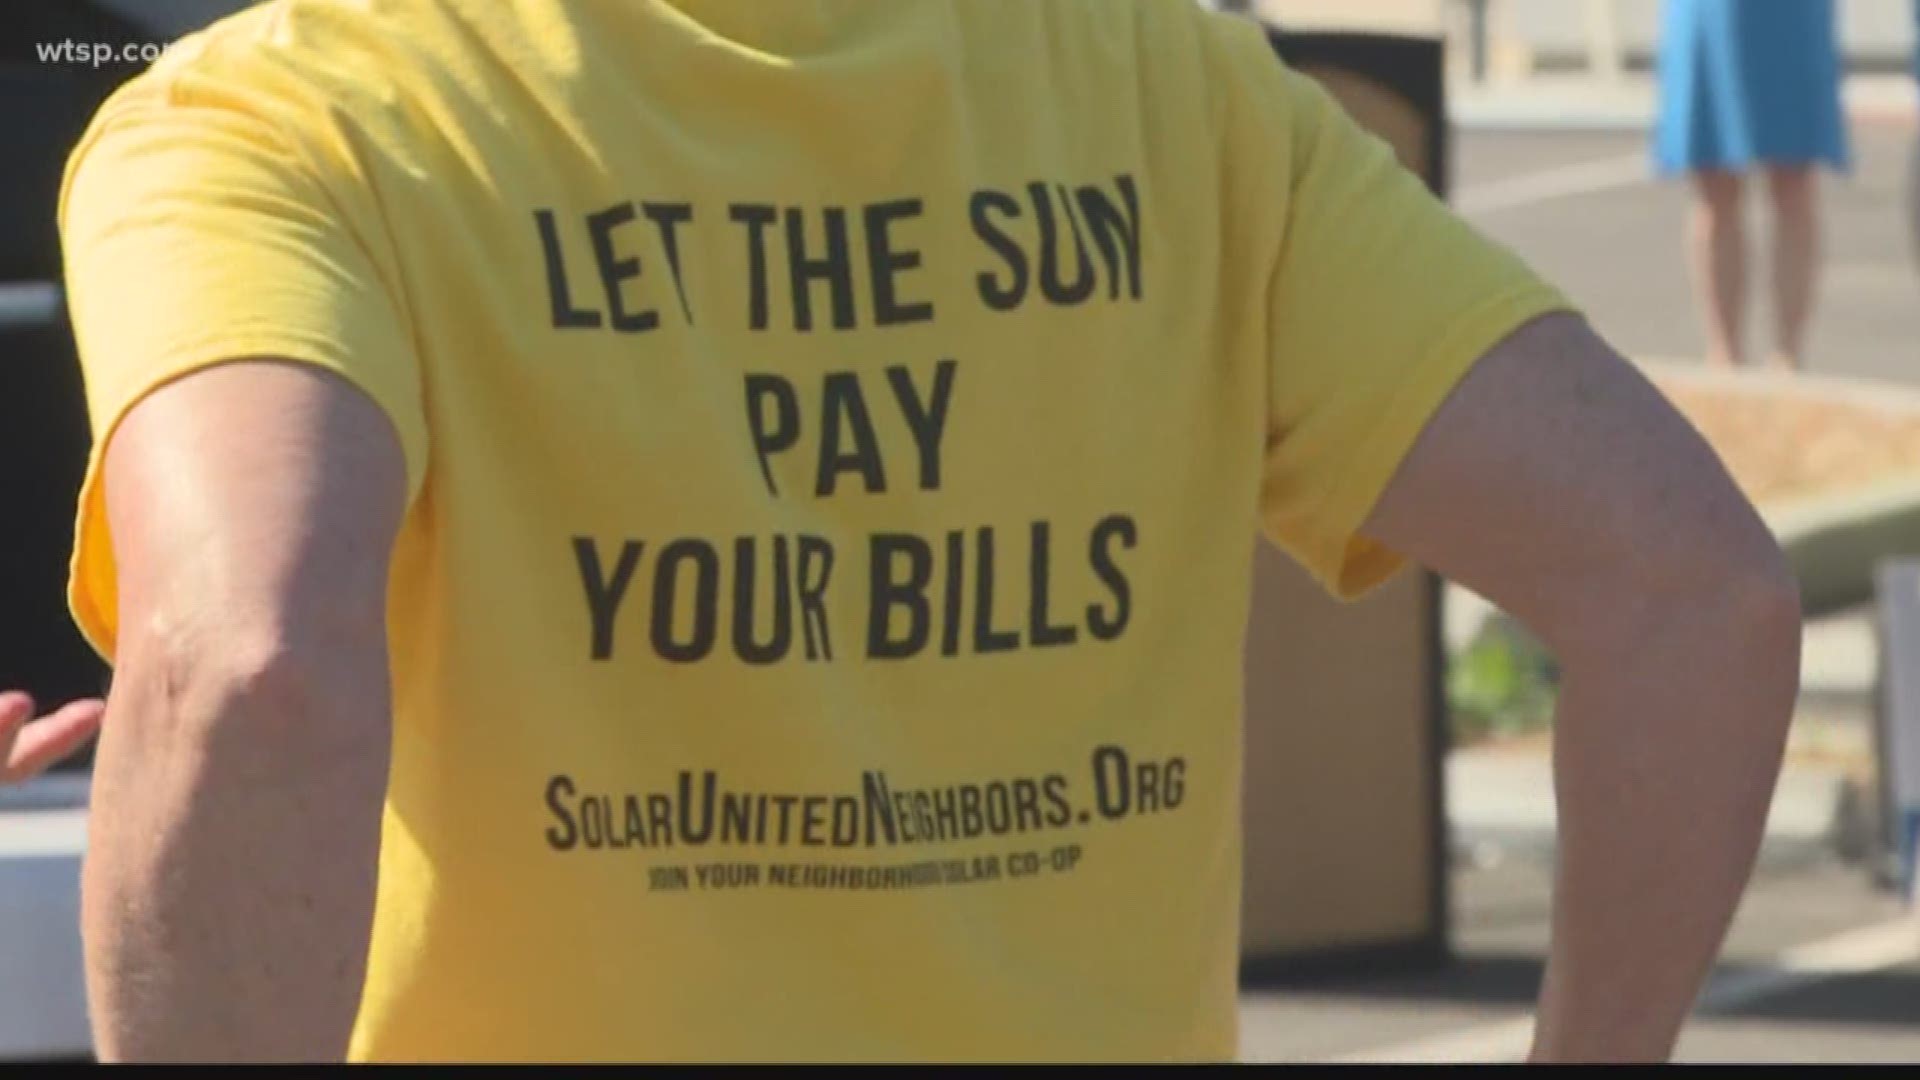 The group aims to make it easier and economical for homeowners to convert to solar energy.